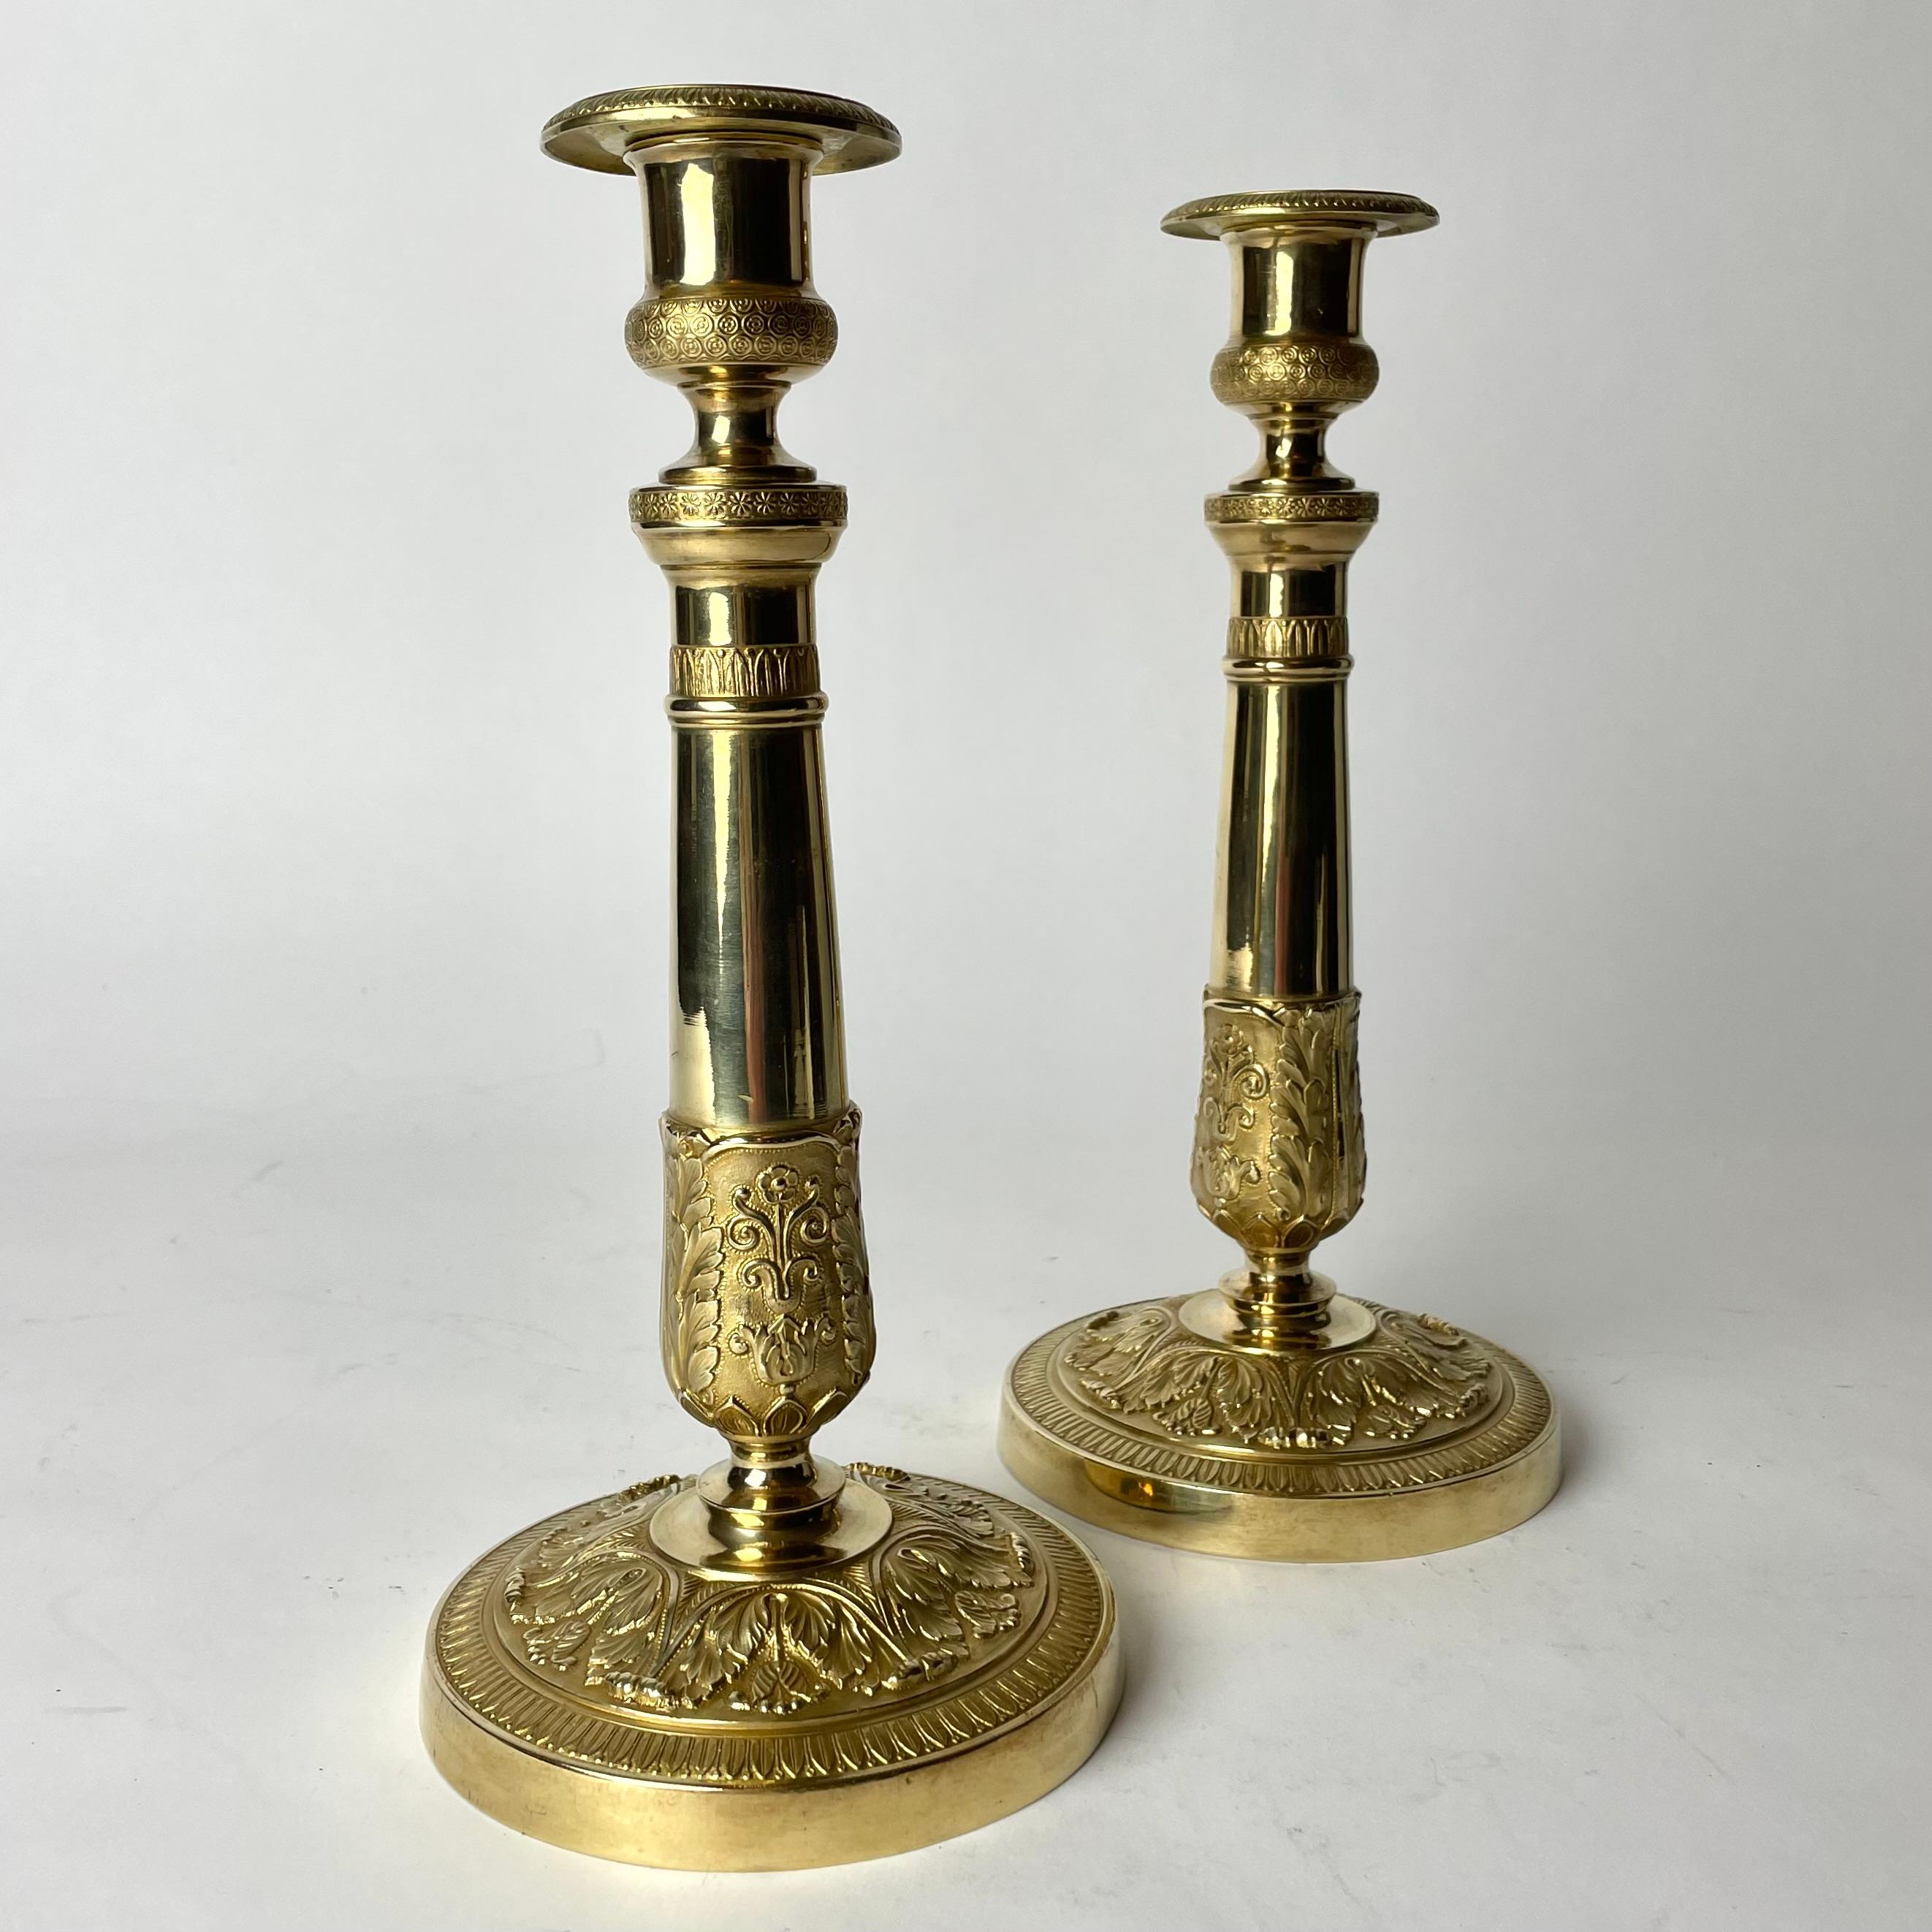 Elegant pair of Empire Candlesticks in gilt bronze. Made in France during the 1820s. Richly decorated in period decorations.

Wear consistent with age and use 